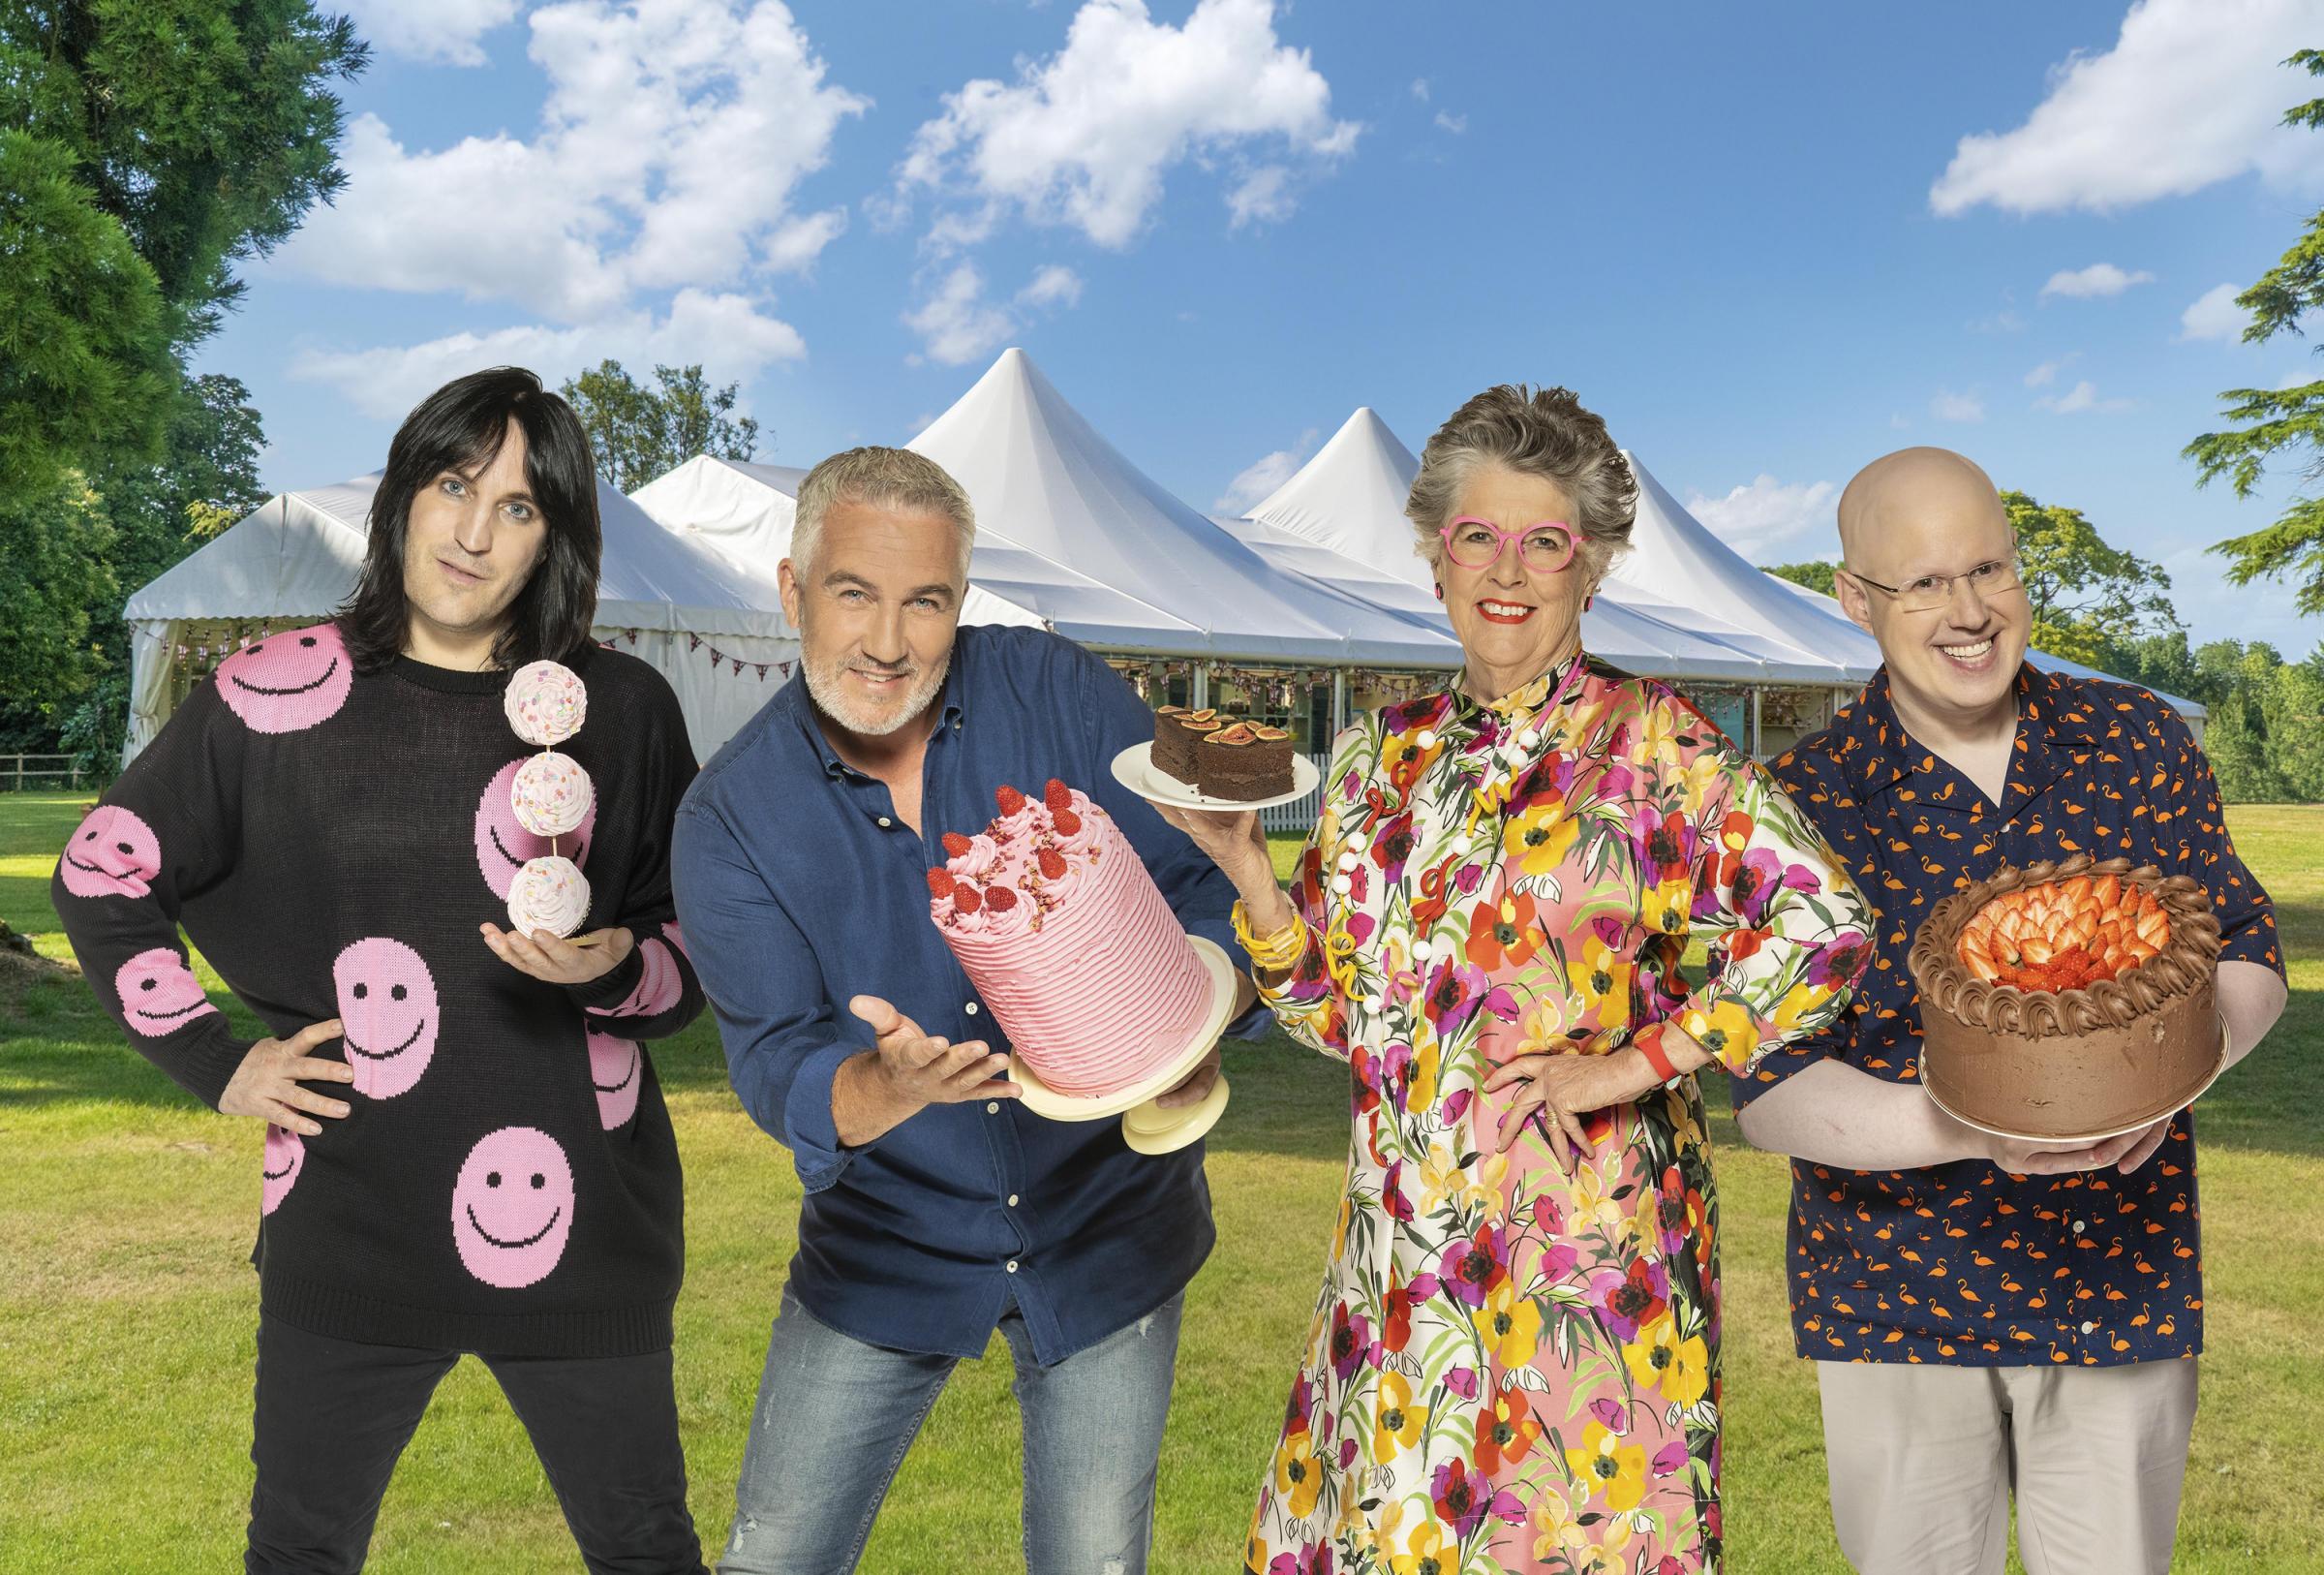 Undated handout photo issued by C4/Love Productions of Noel, Paul, Prue and Matt from The Great British Bake Off 2021.